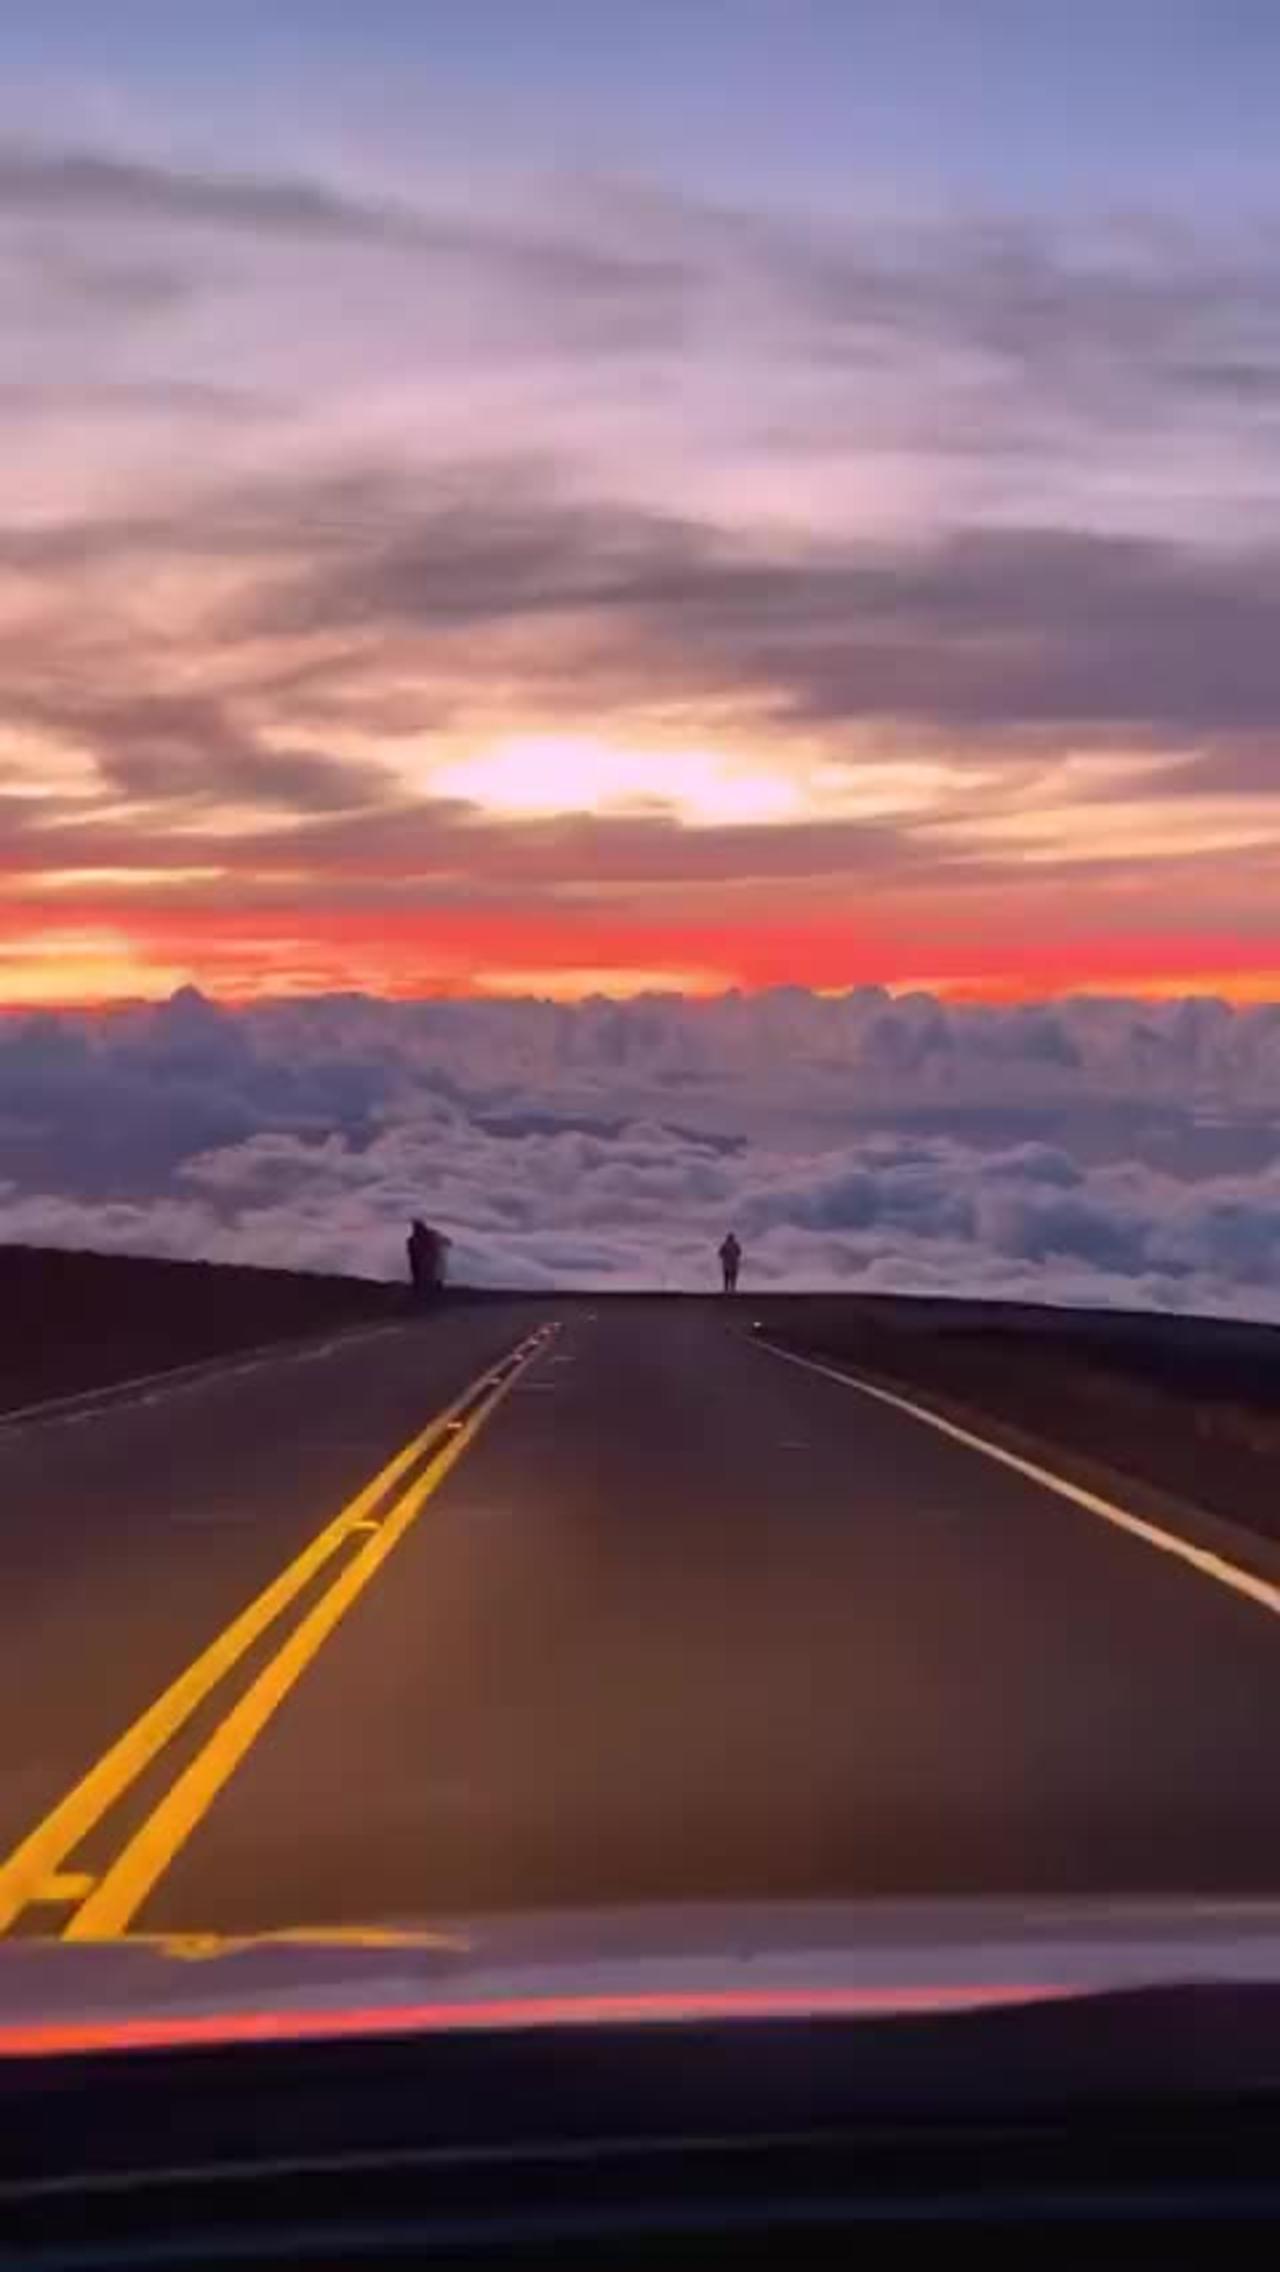 Riding into the sunset in Maui, Hawaii 🌅